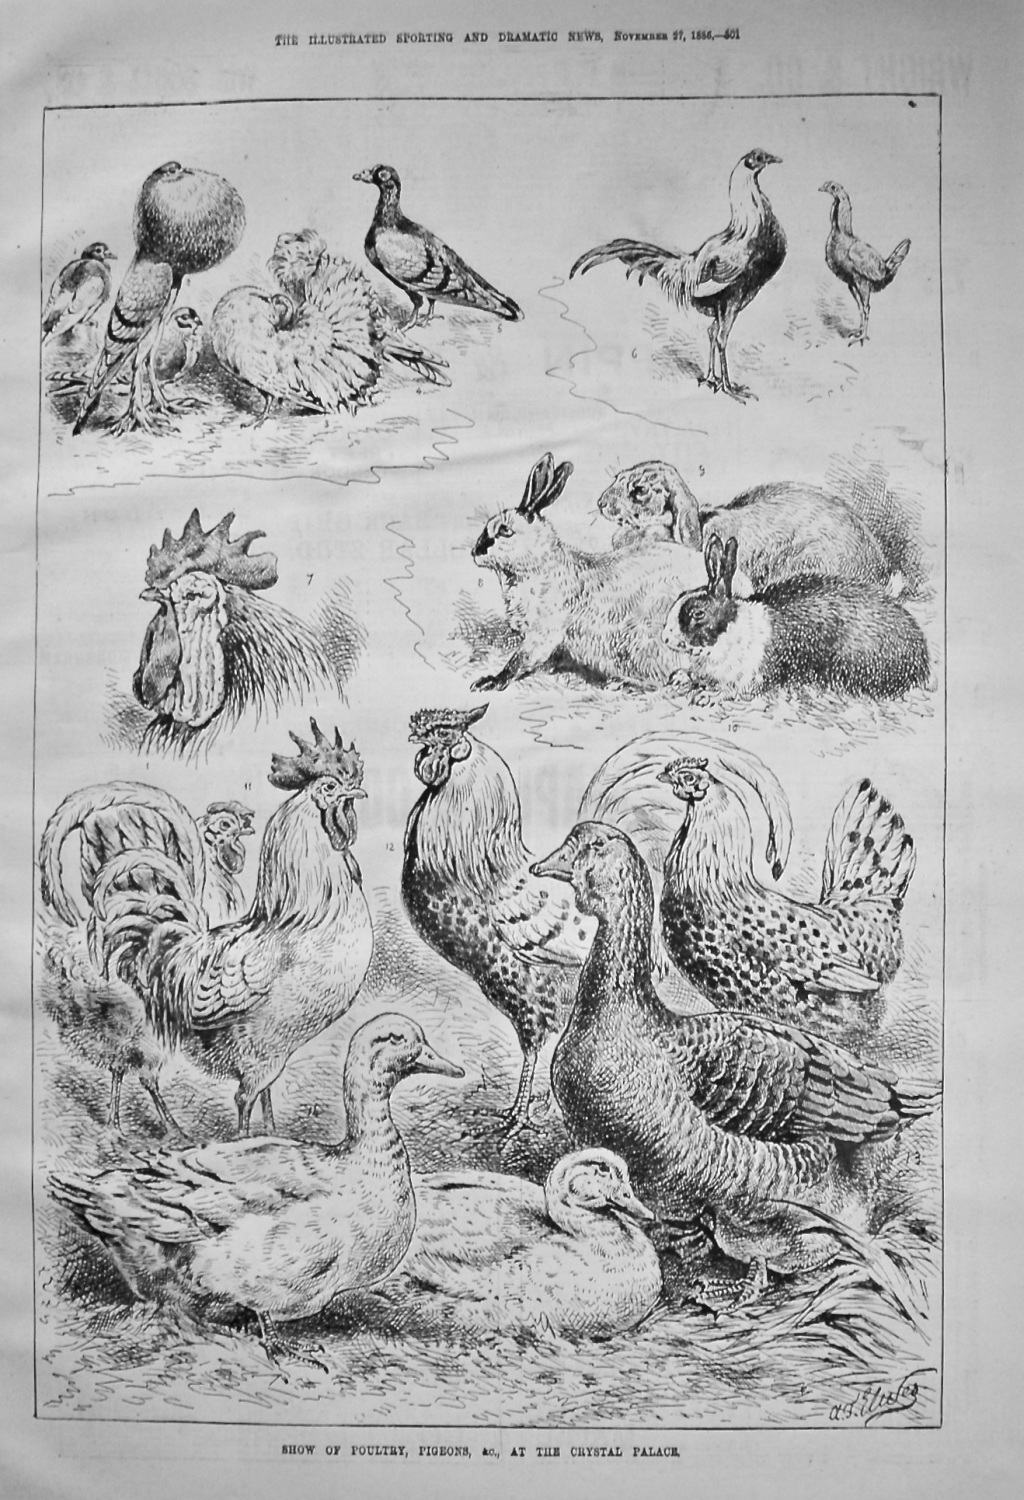 Show of Poultry, Pigeons, &c., at the Crystal Palace. 1886